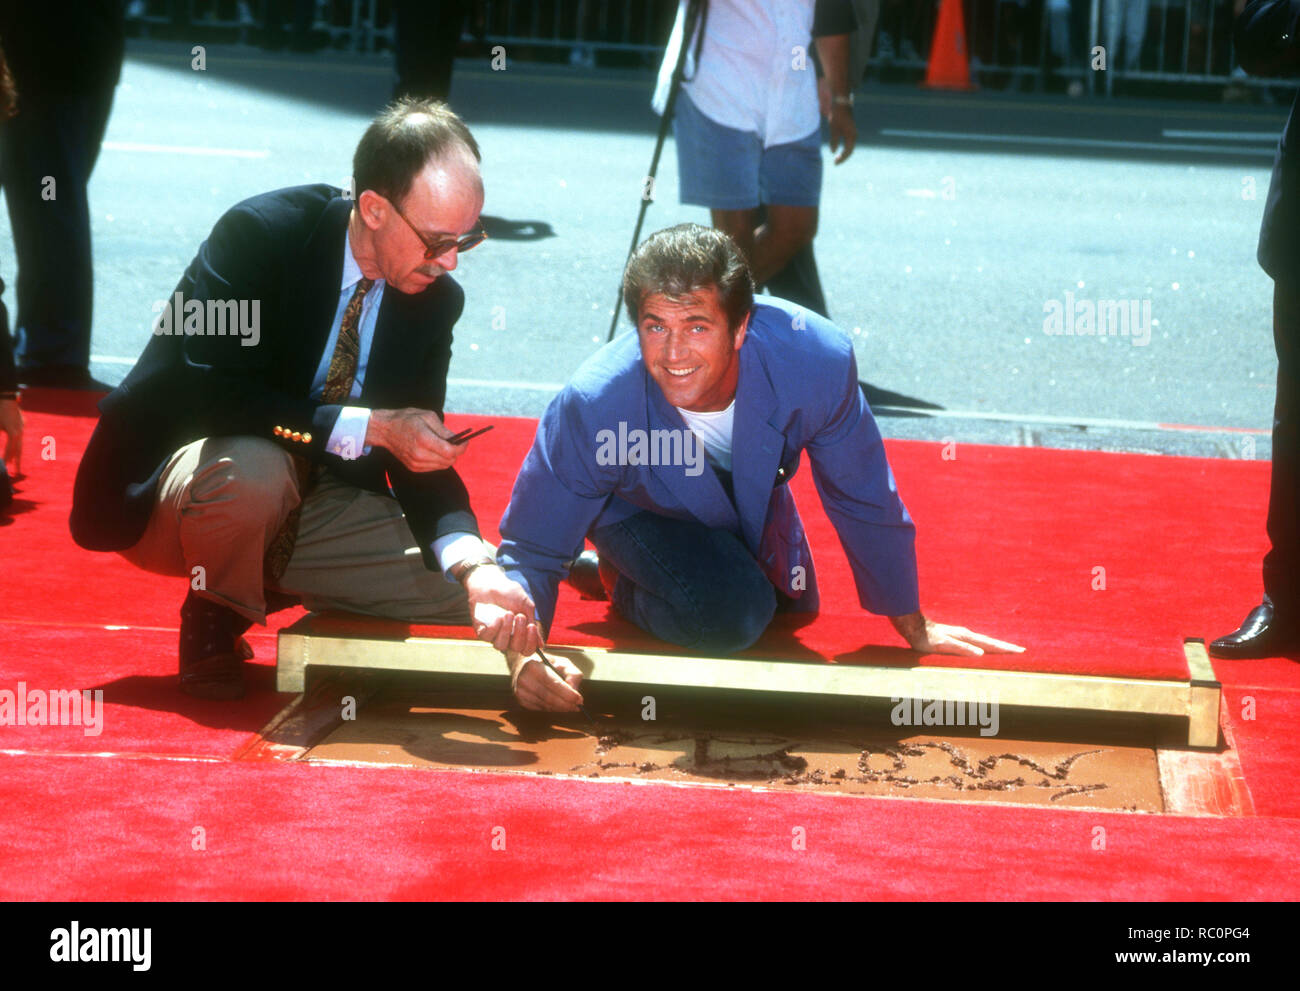 HOLLYWOOD, CA - AUGUST 23: Actor Mel Gibson places his hand and foot prints in cement on August 23, 1993 at Mann's Chinese Theatre in Hollywood, California. Photo by Barry King/Alamy Stock Photo Stock Photo